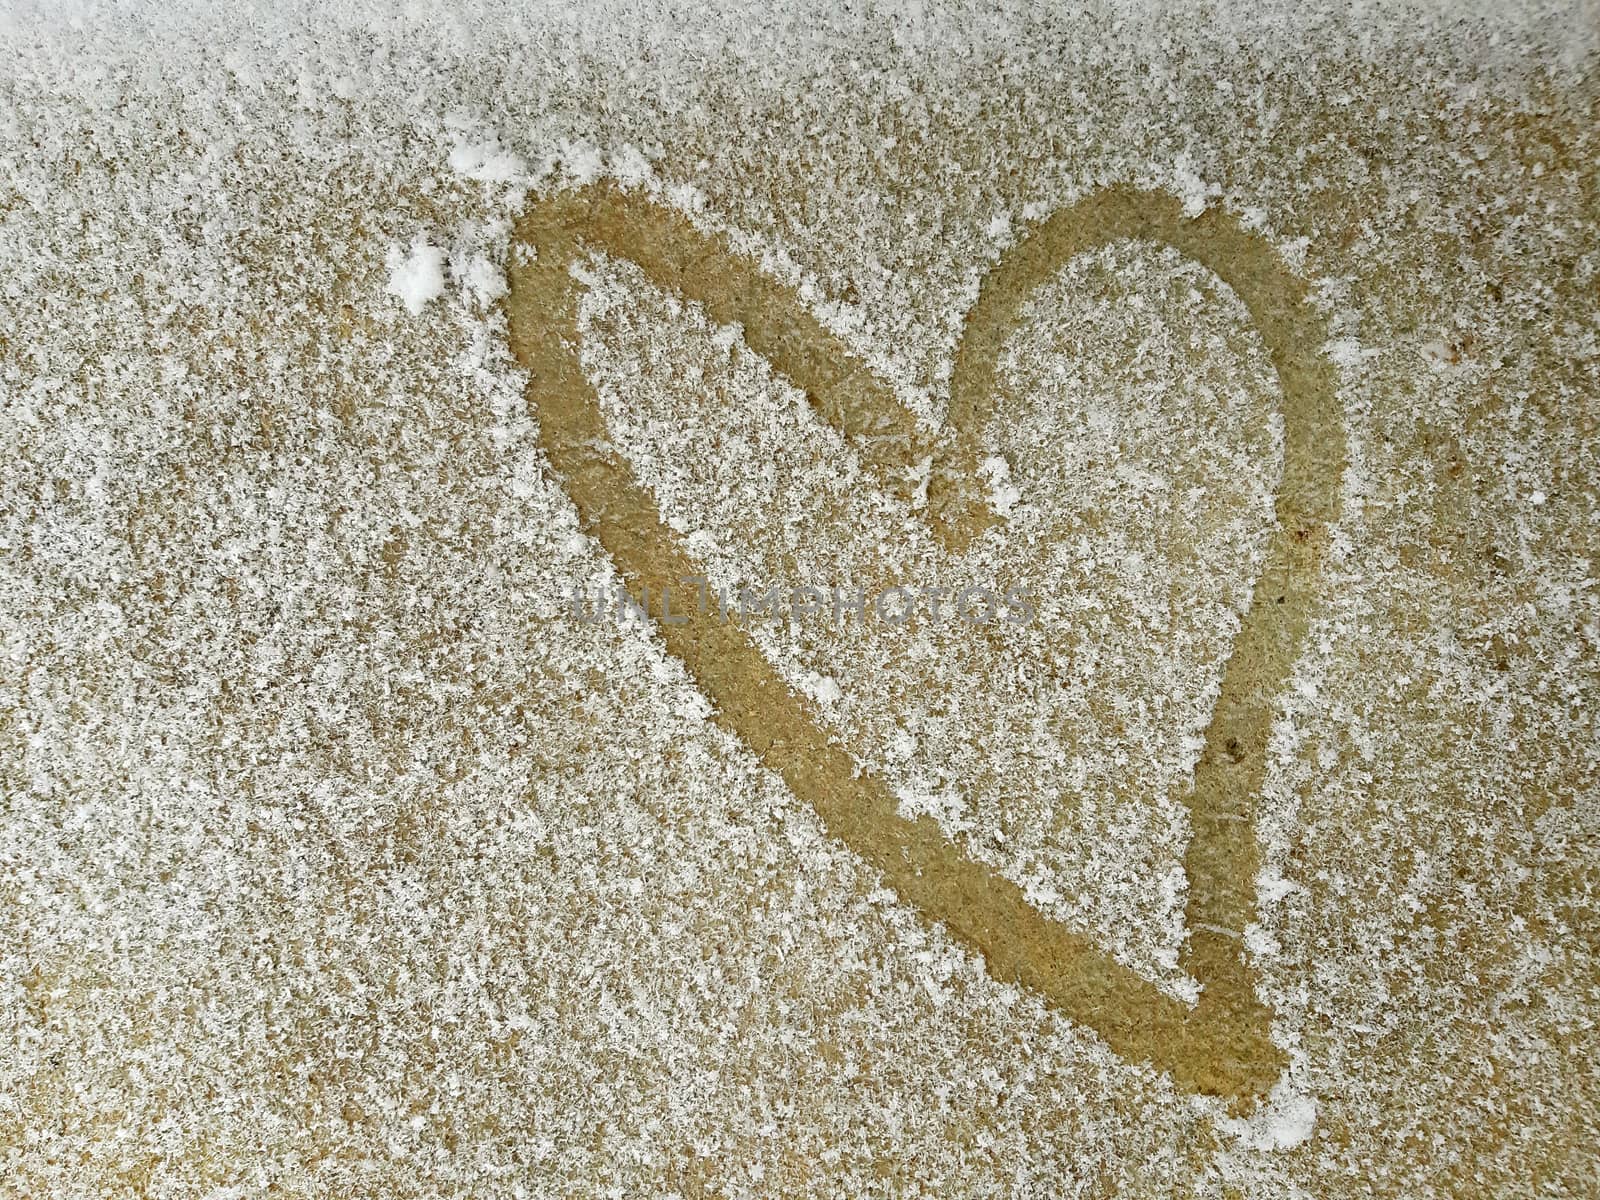 Heart drawn on a thin layer of snow. Valentines day concept.